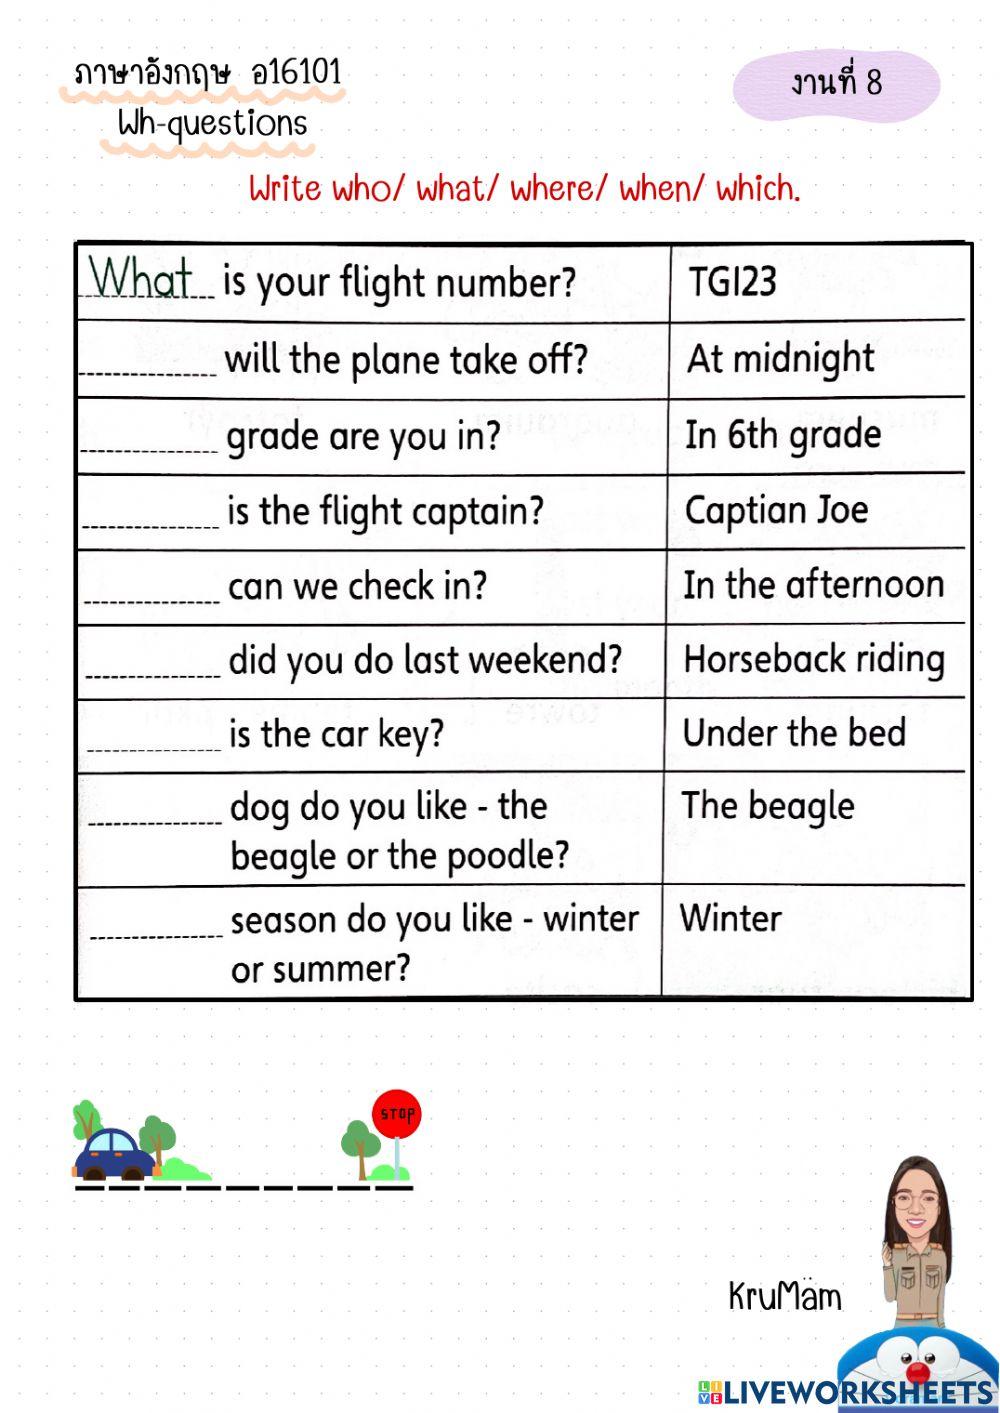 Wh-questions p6-8